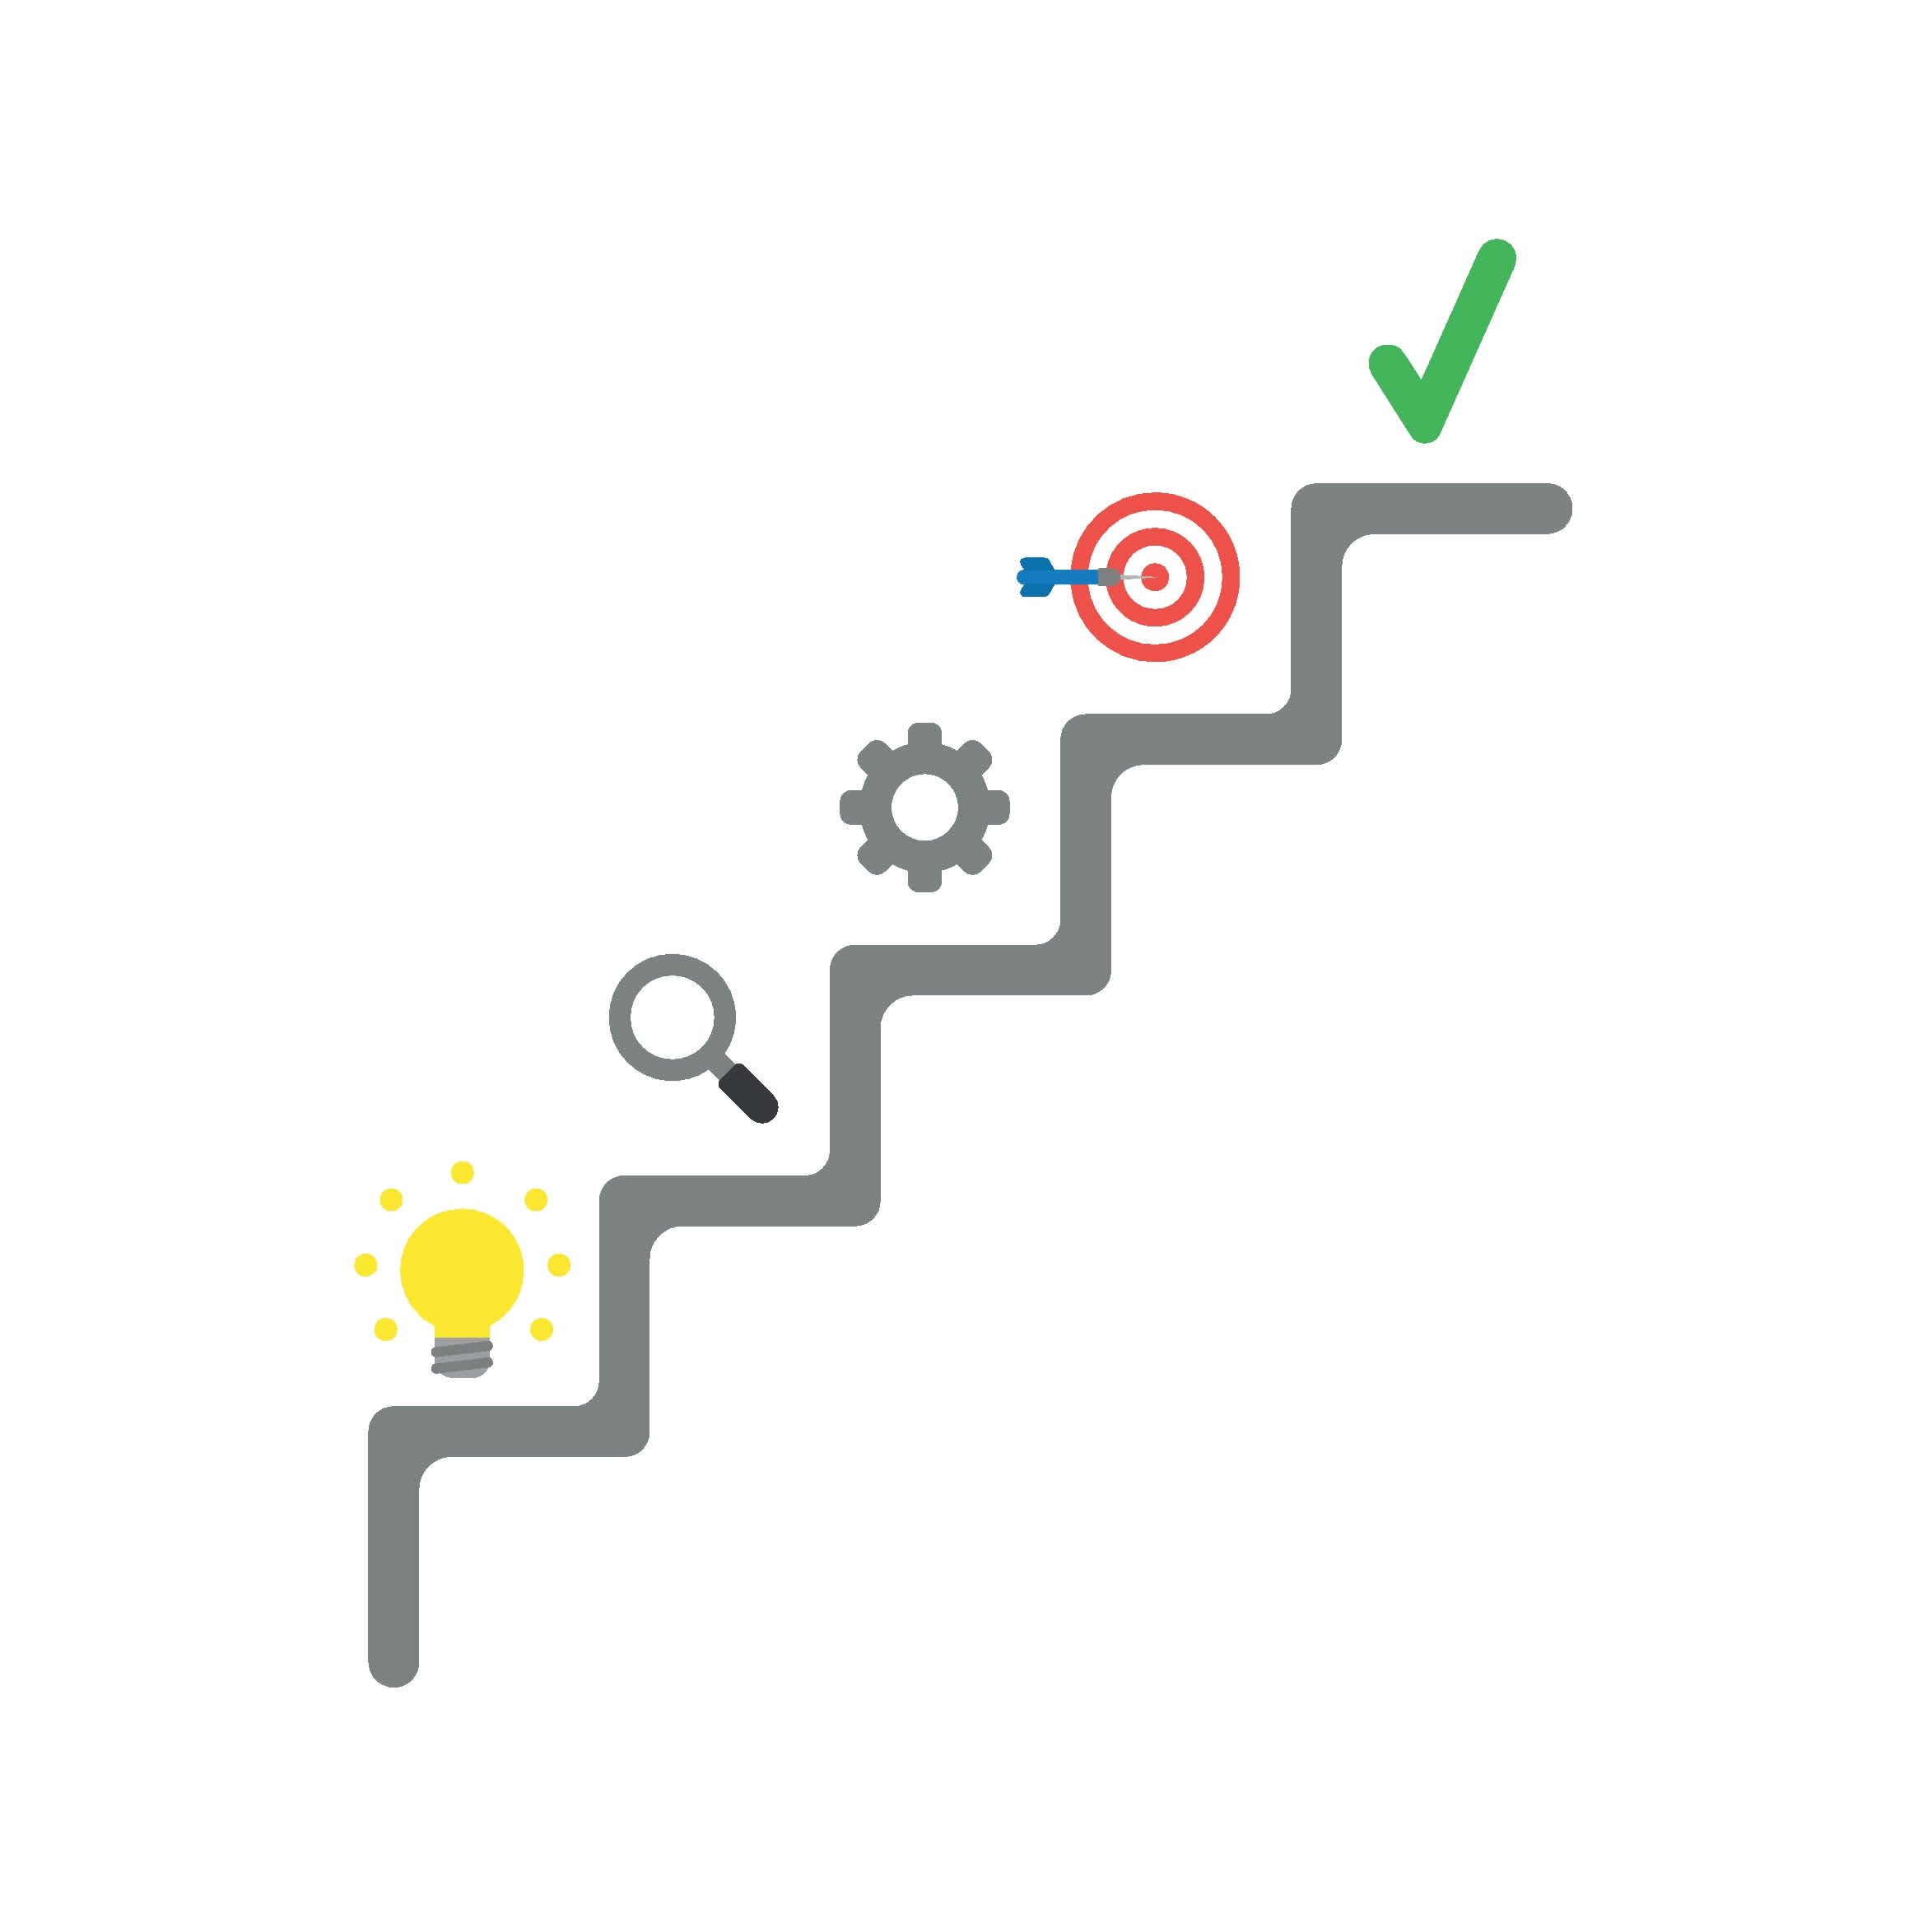 Use conditions to determine the next step in a Hubspot workflow.